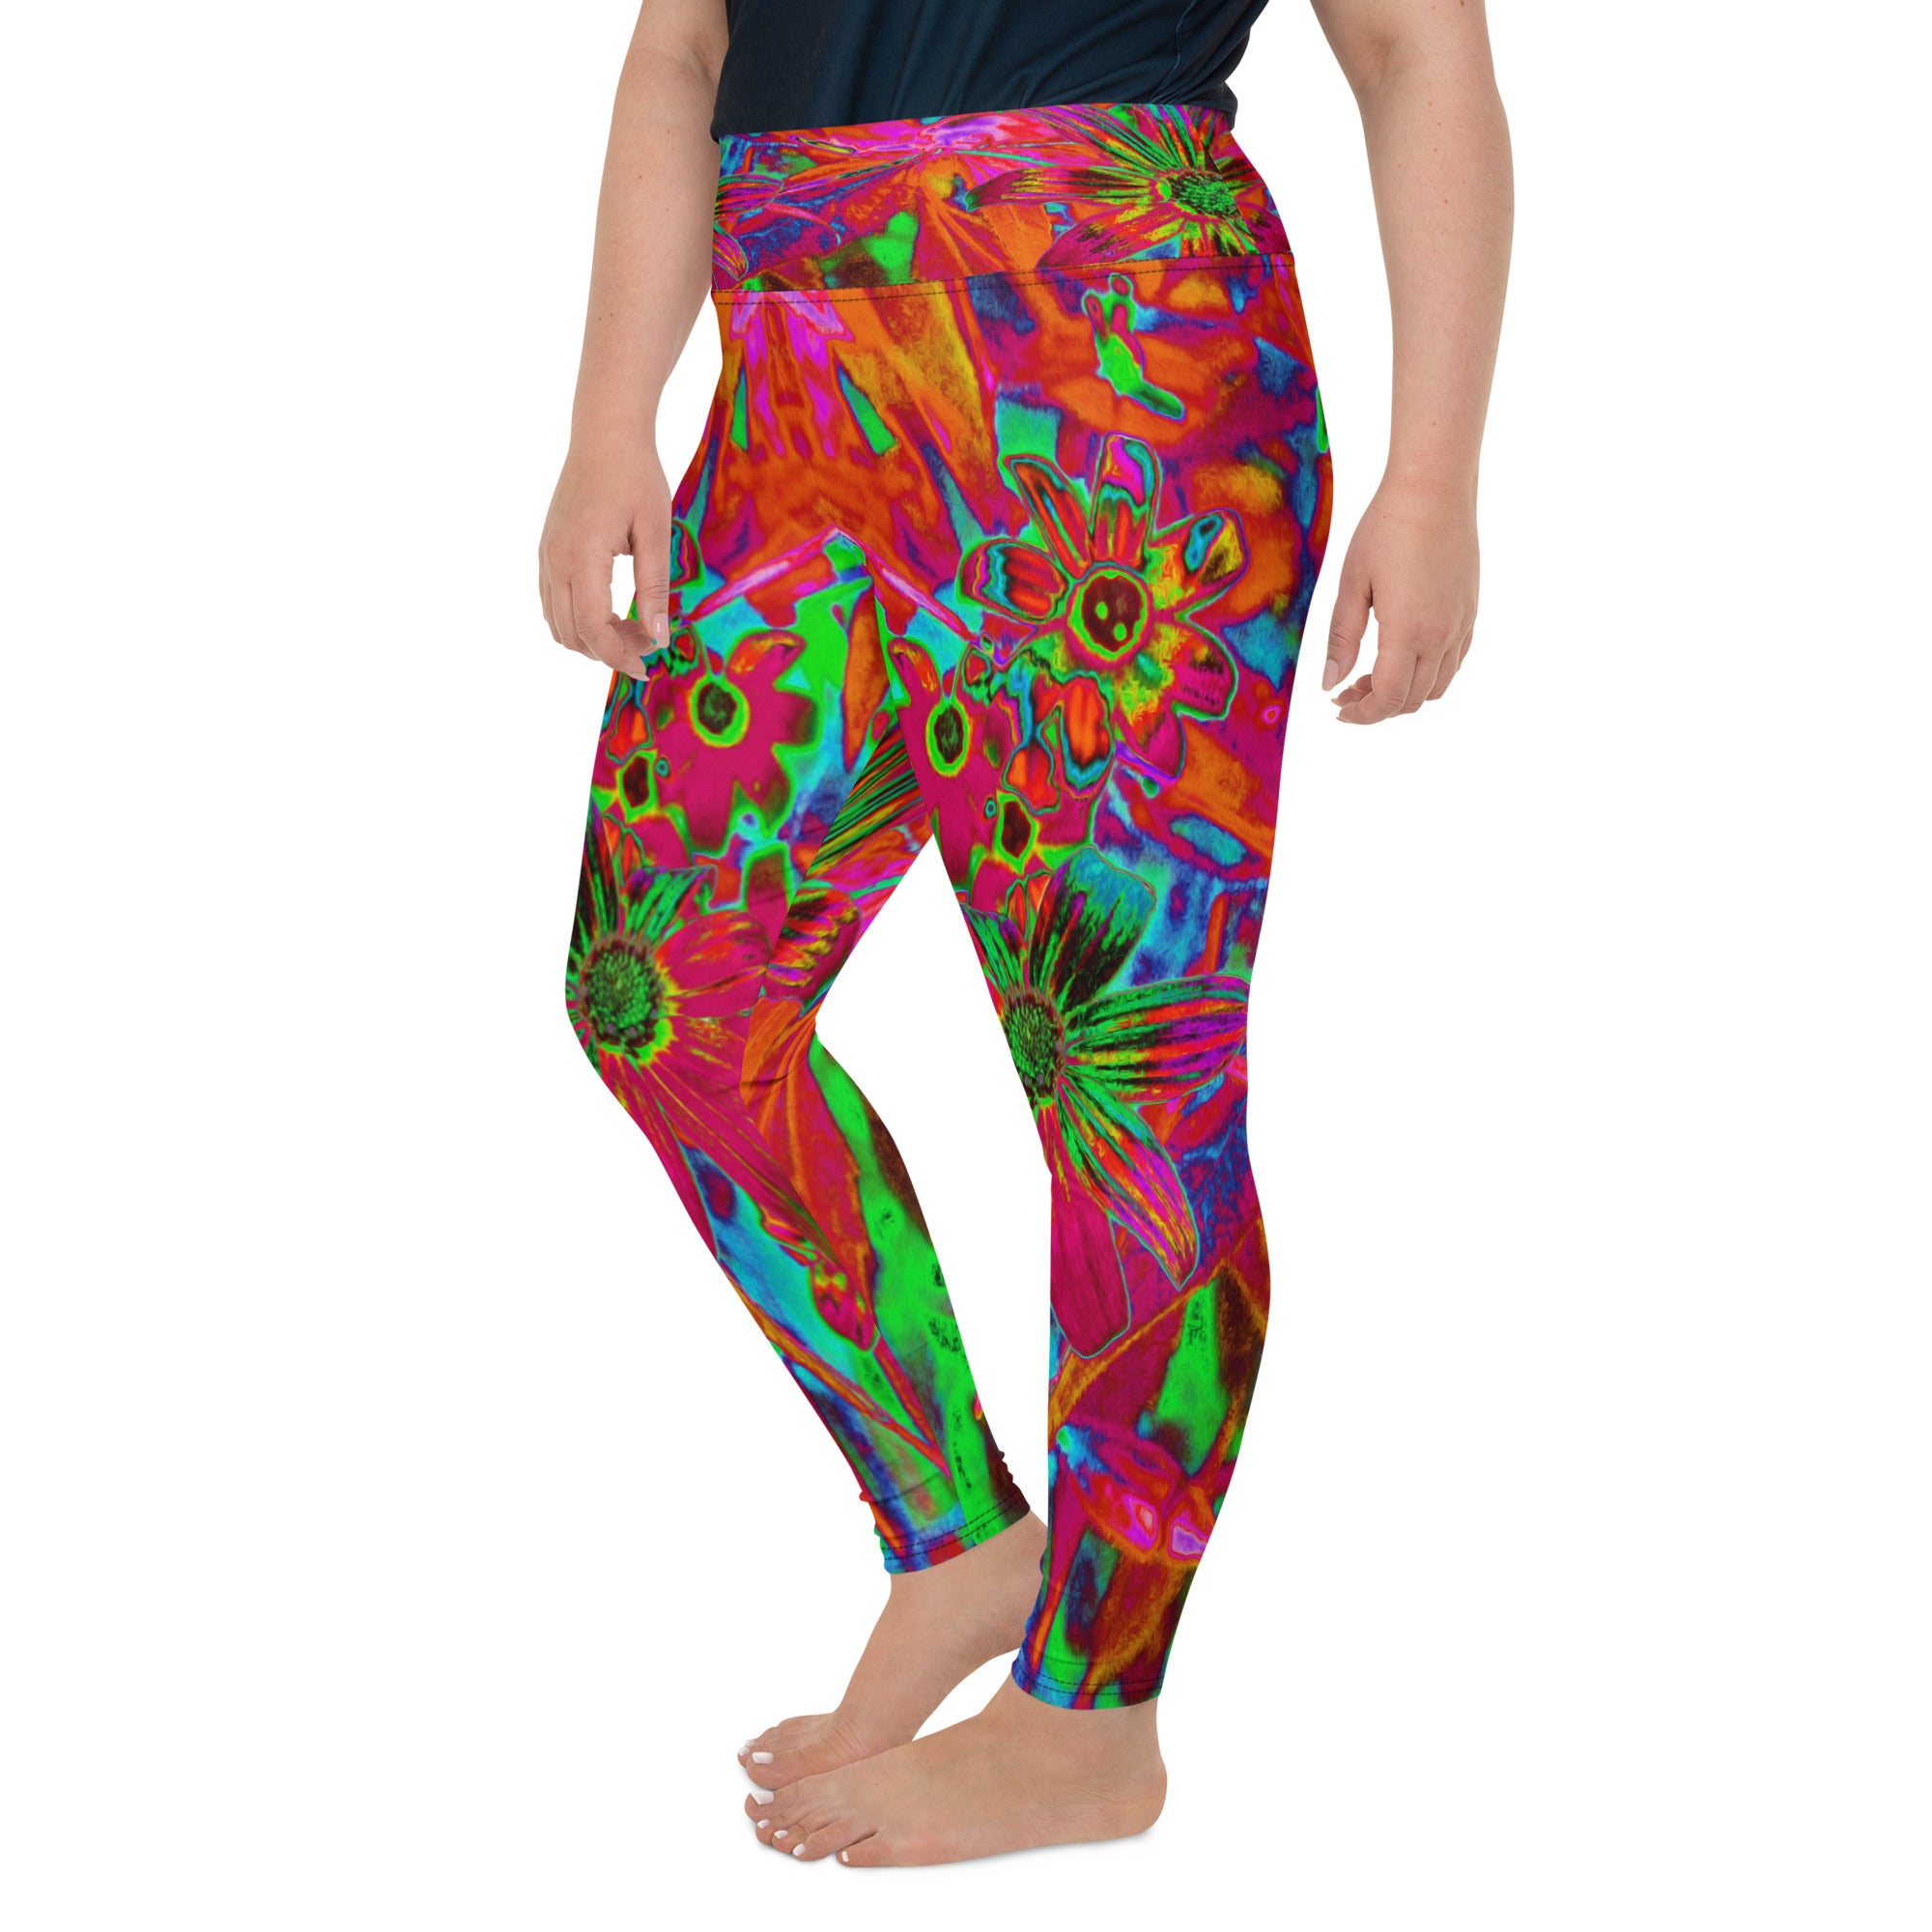 Plus Size Leggings, Psychedelic Groovy Red and Green Wildflowers